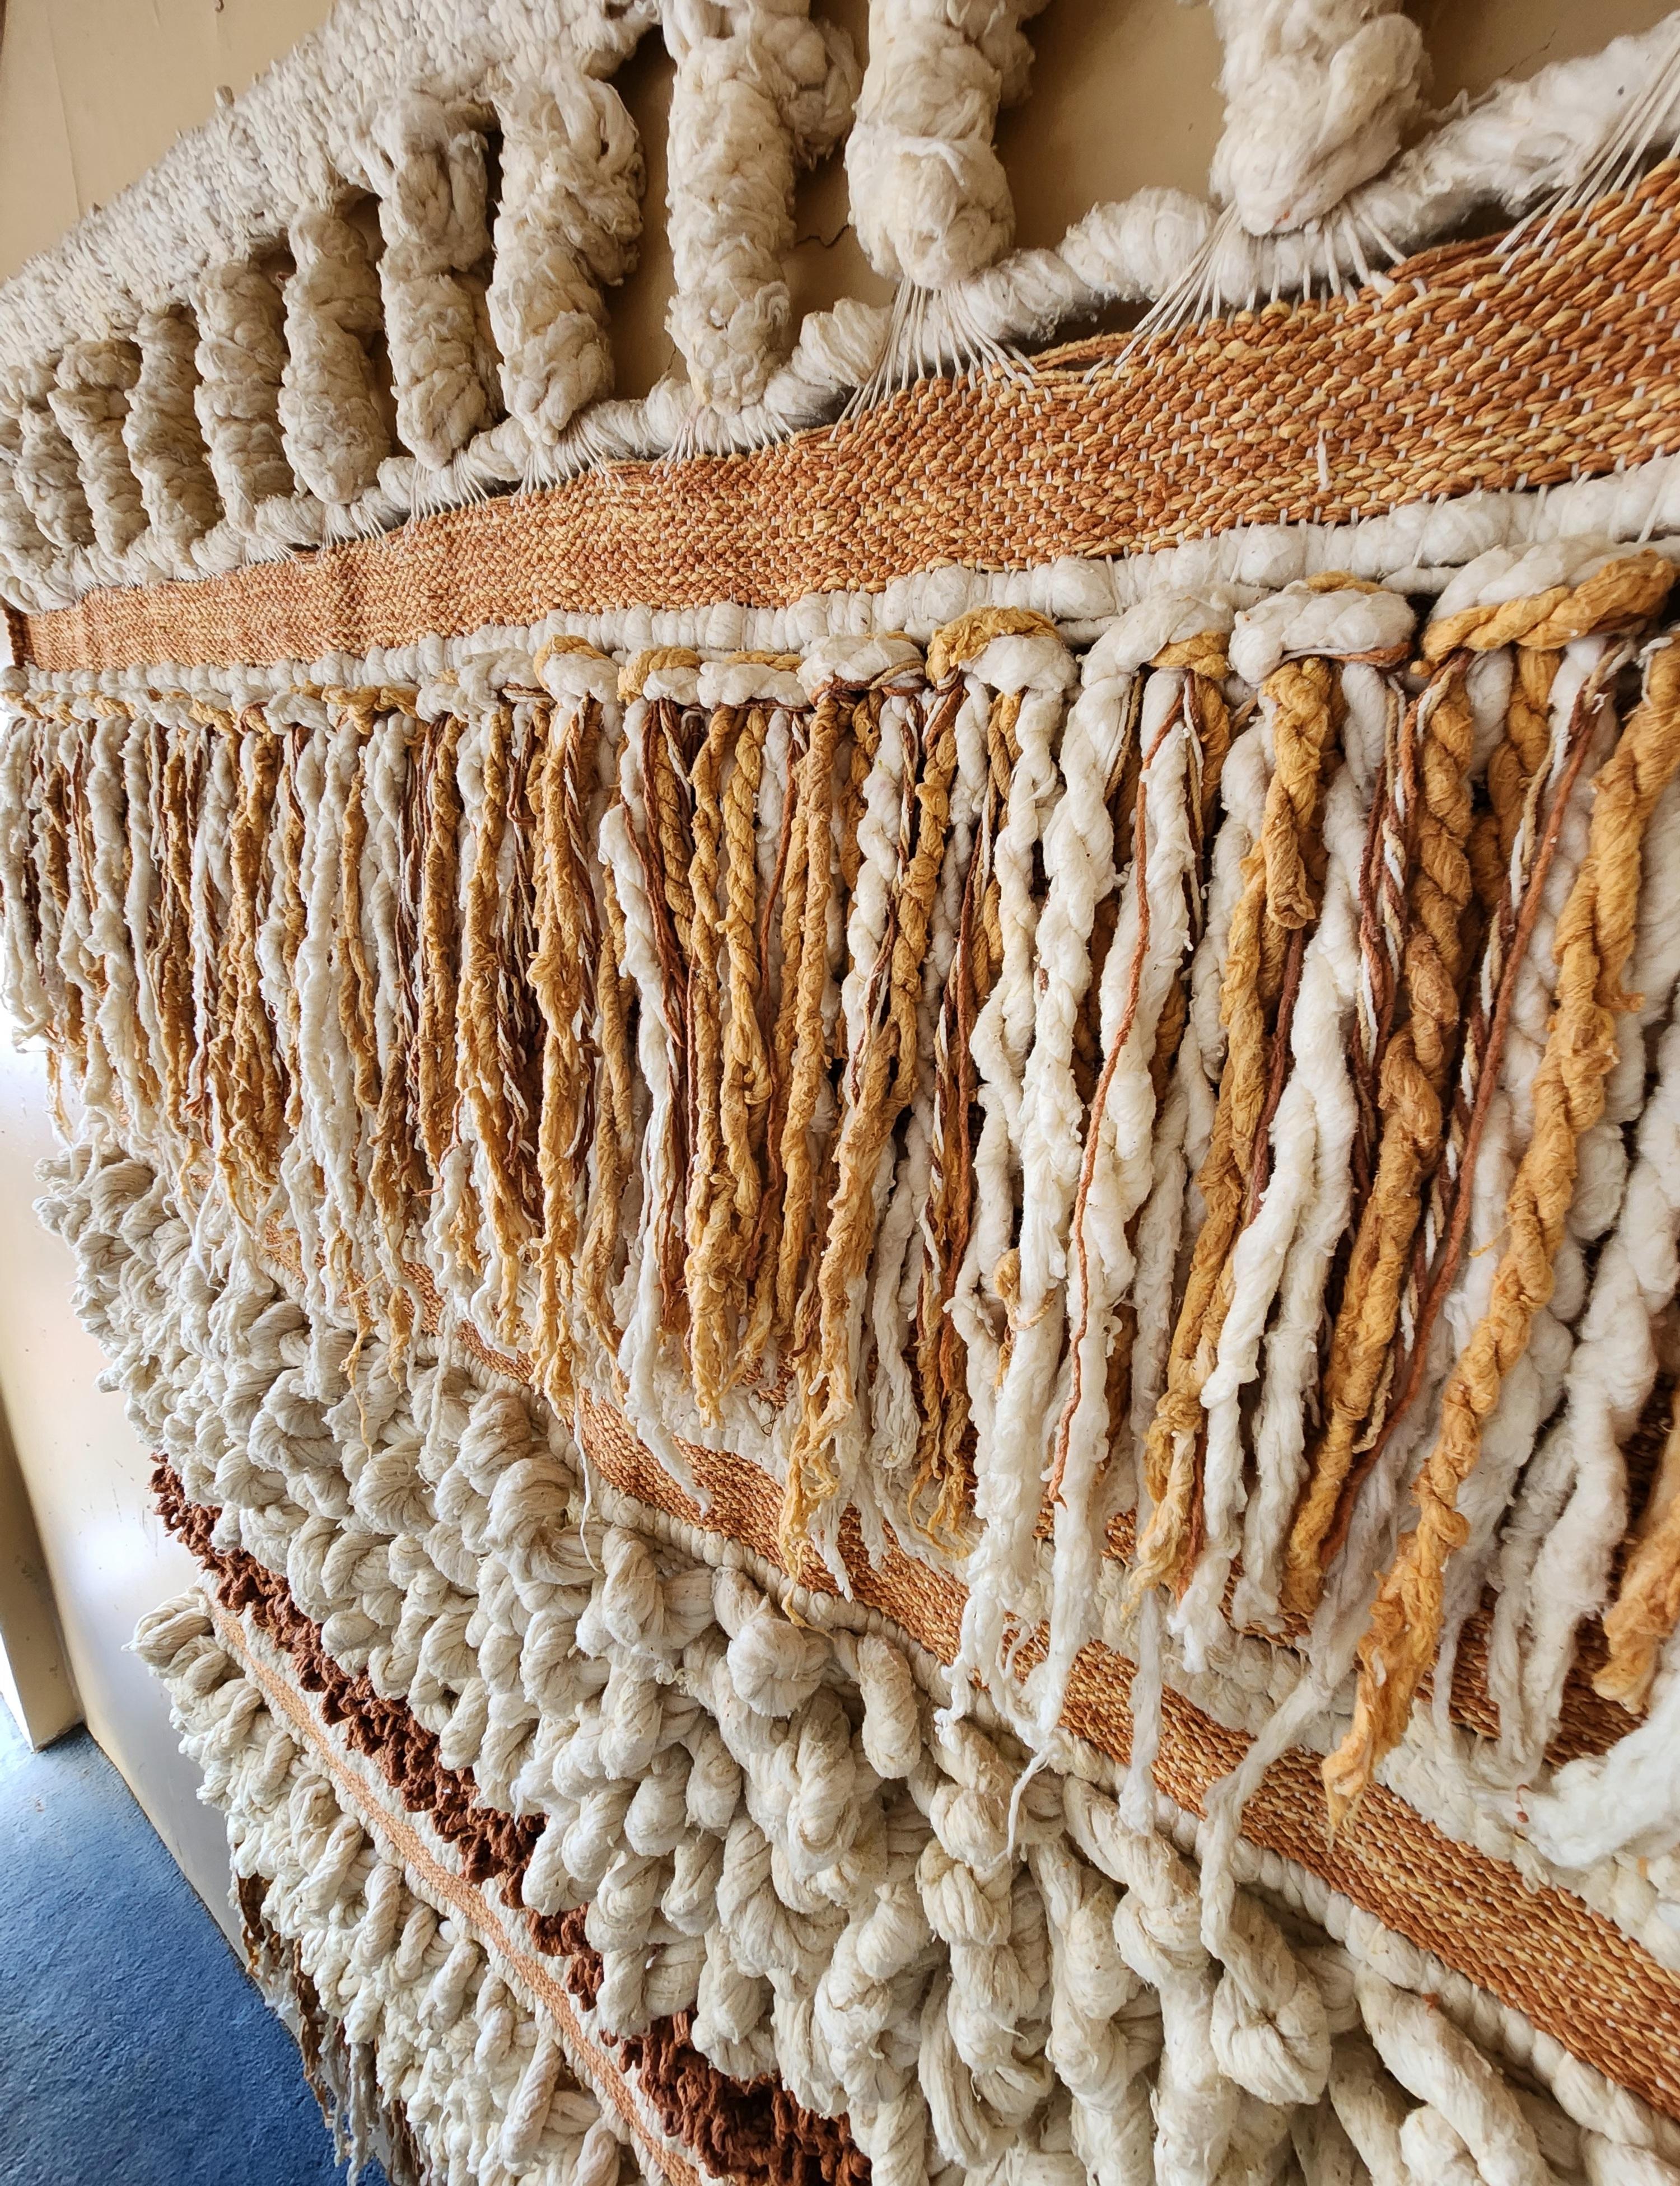 This is a fabulous vintage x-large wool wall hanging from the Late Mid-Century Modern era. Artesian and handmade this piece is one of a kind! The woven wool and fibers are neutral in color with white, cream, tan, peach and rust colors. The texture